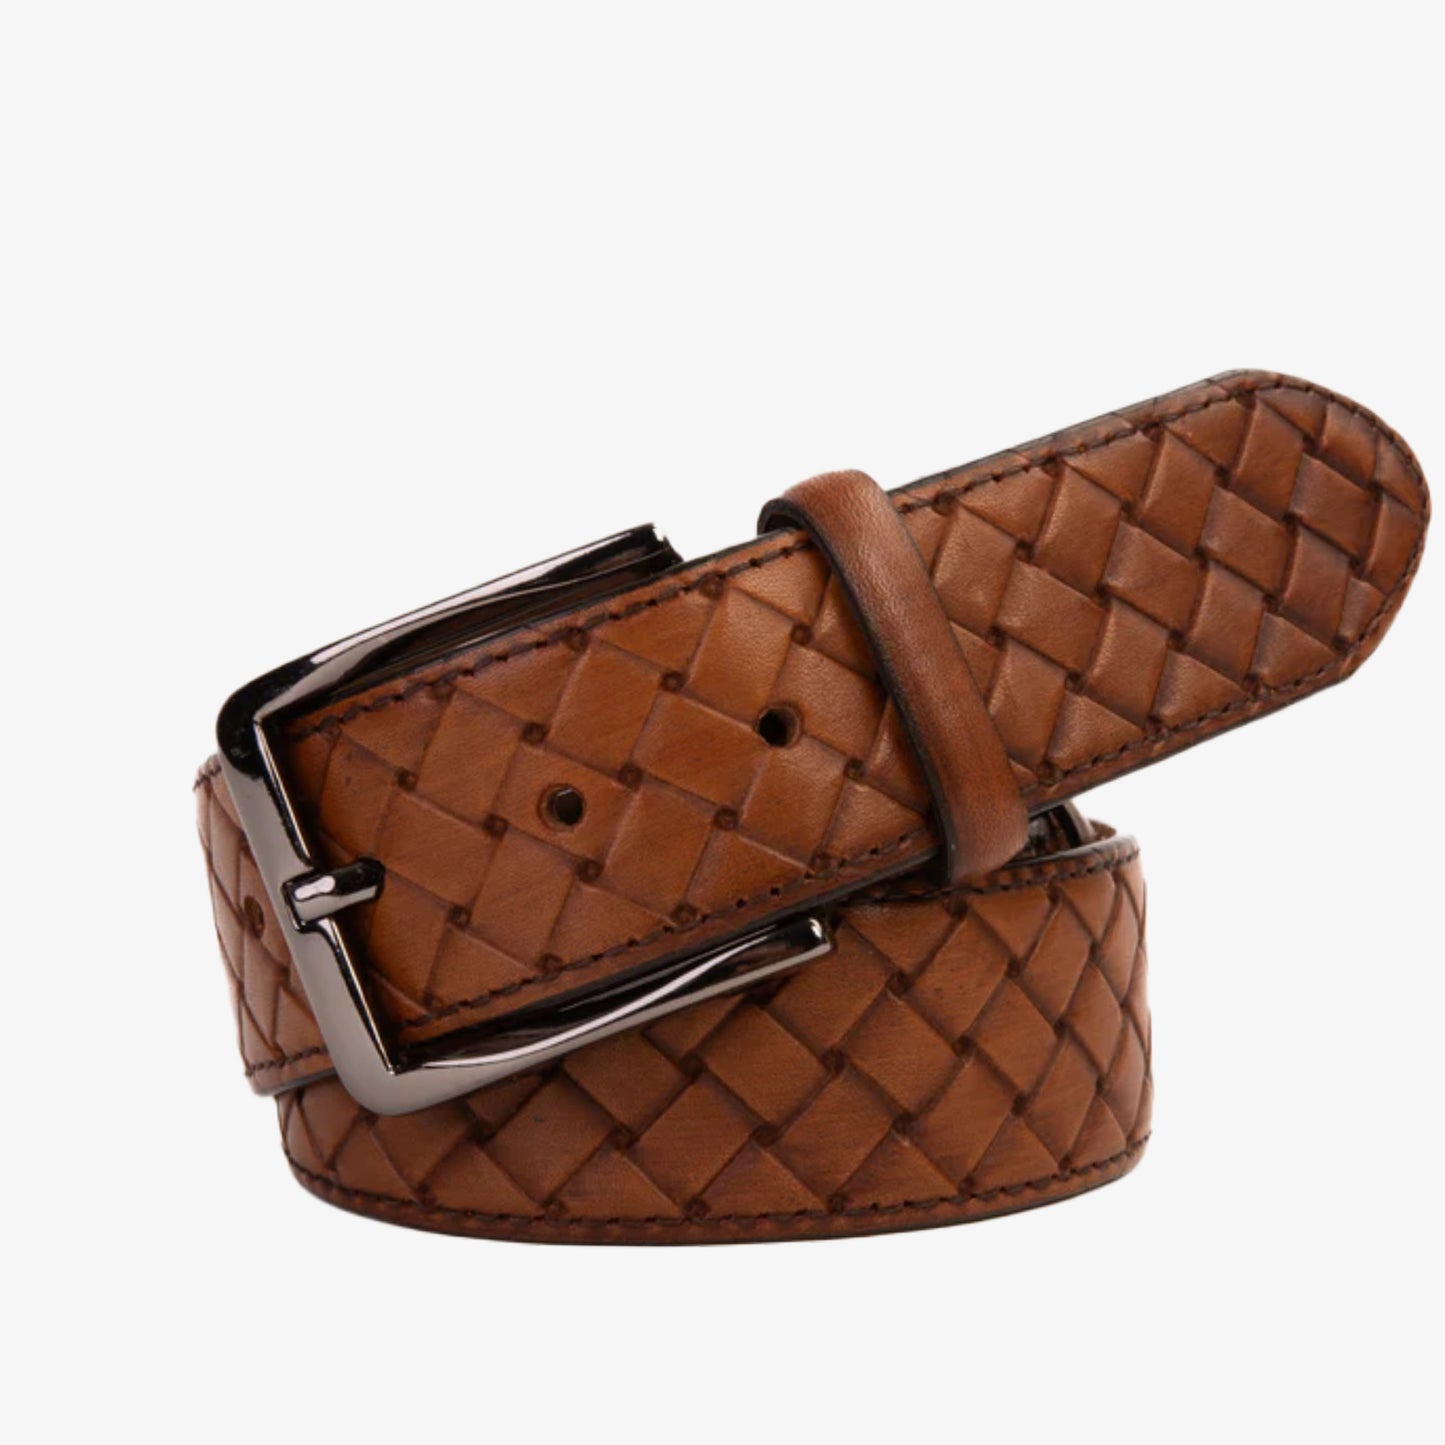 The Turan Brown Handwoven Leather Belt